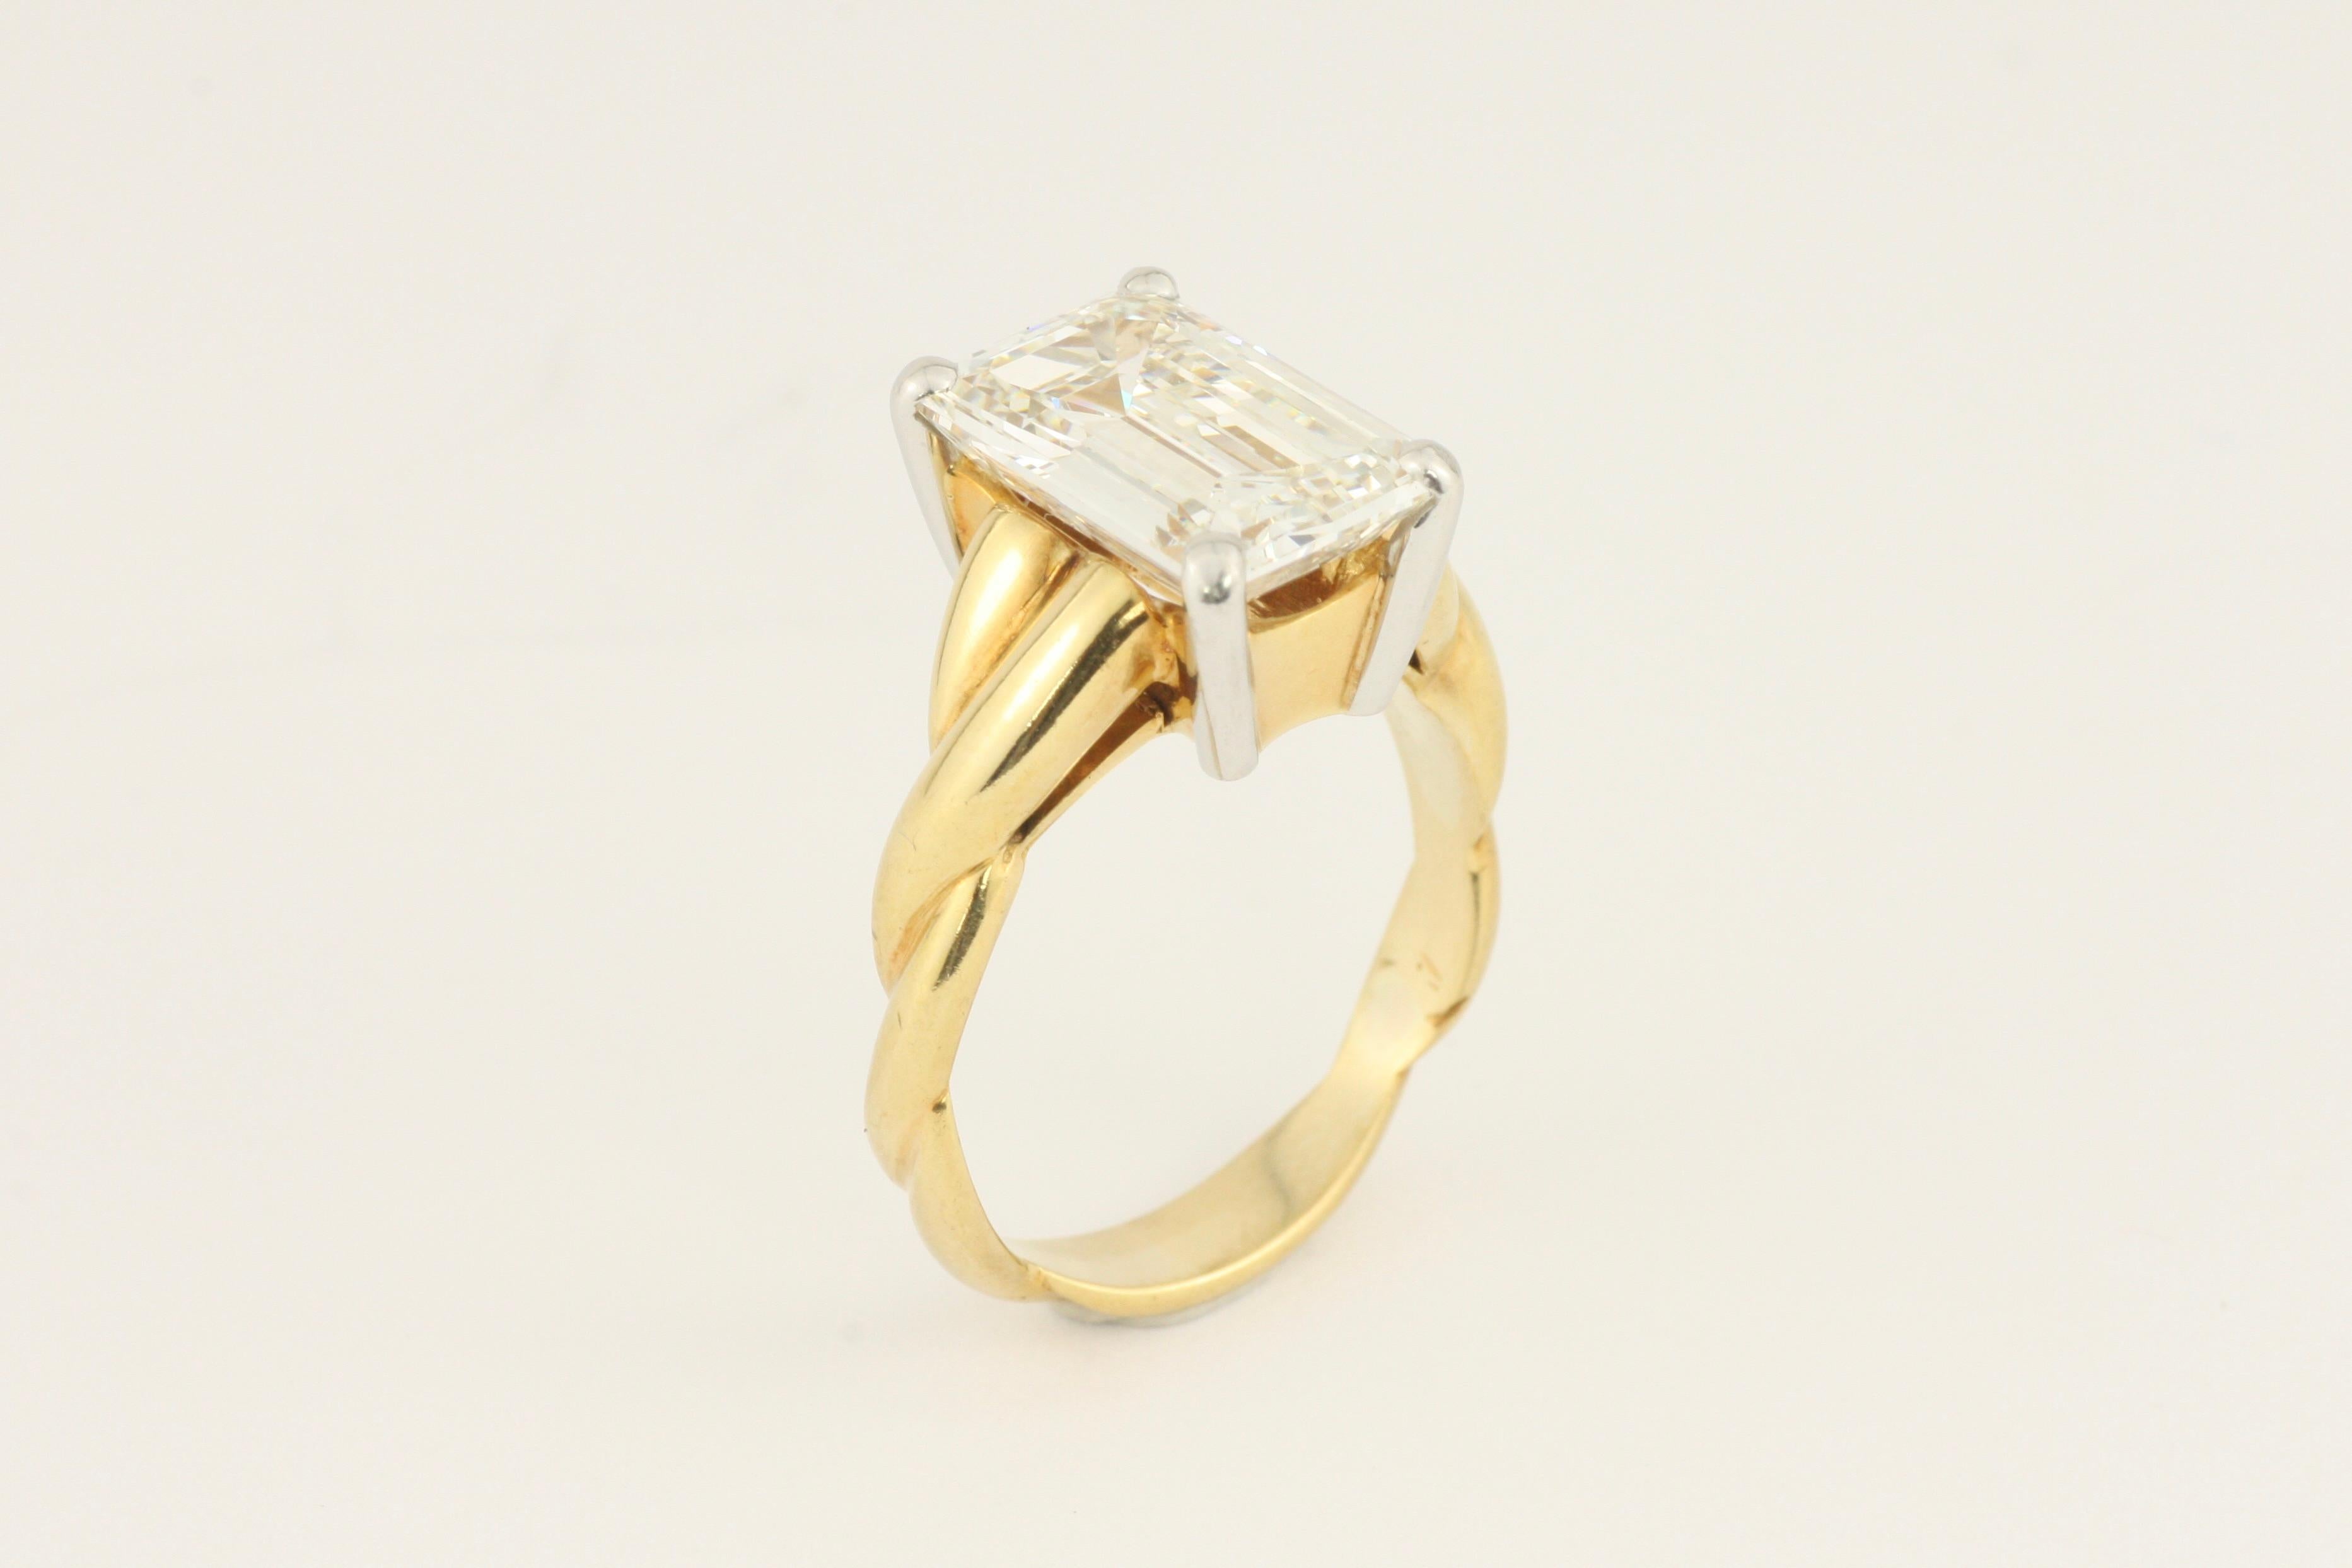 3.90 Carat Emerald Cut Diamond 18 Karat Yellow Gold and Platinum Engagement Ring In Excellent Condition For Sale In Venice, CA